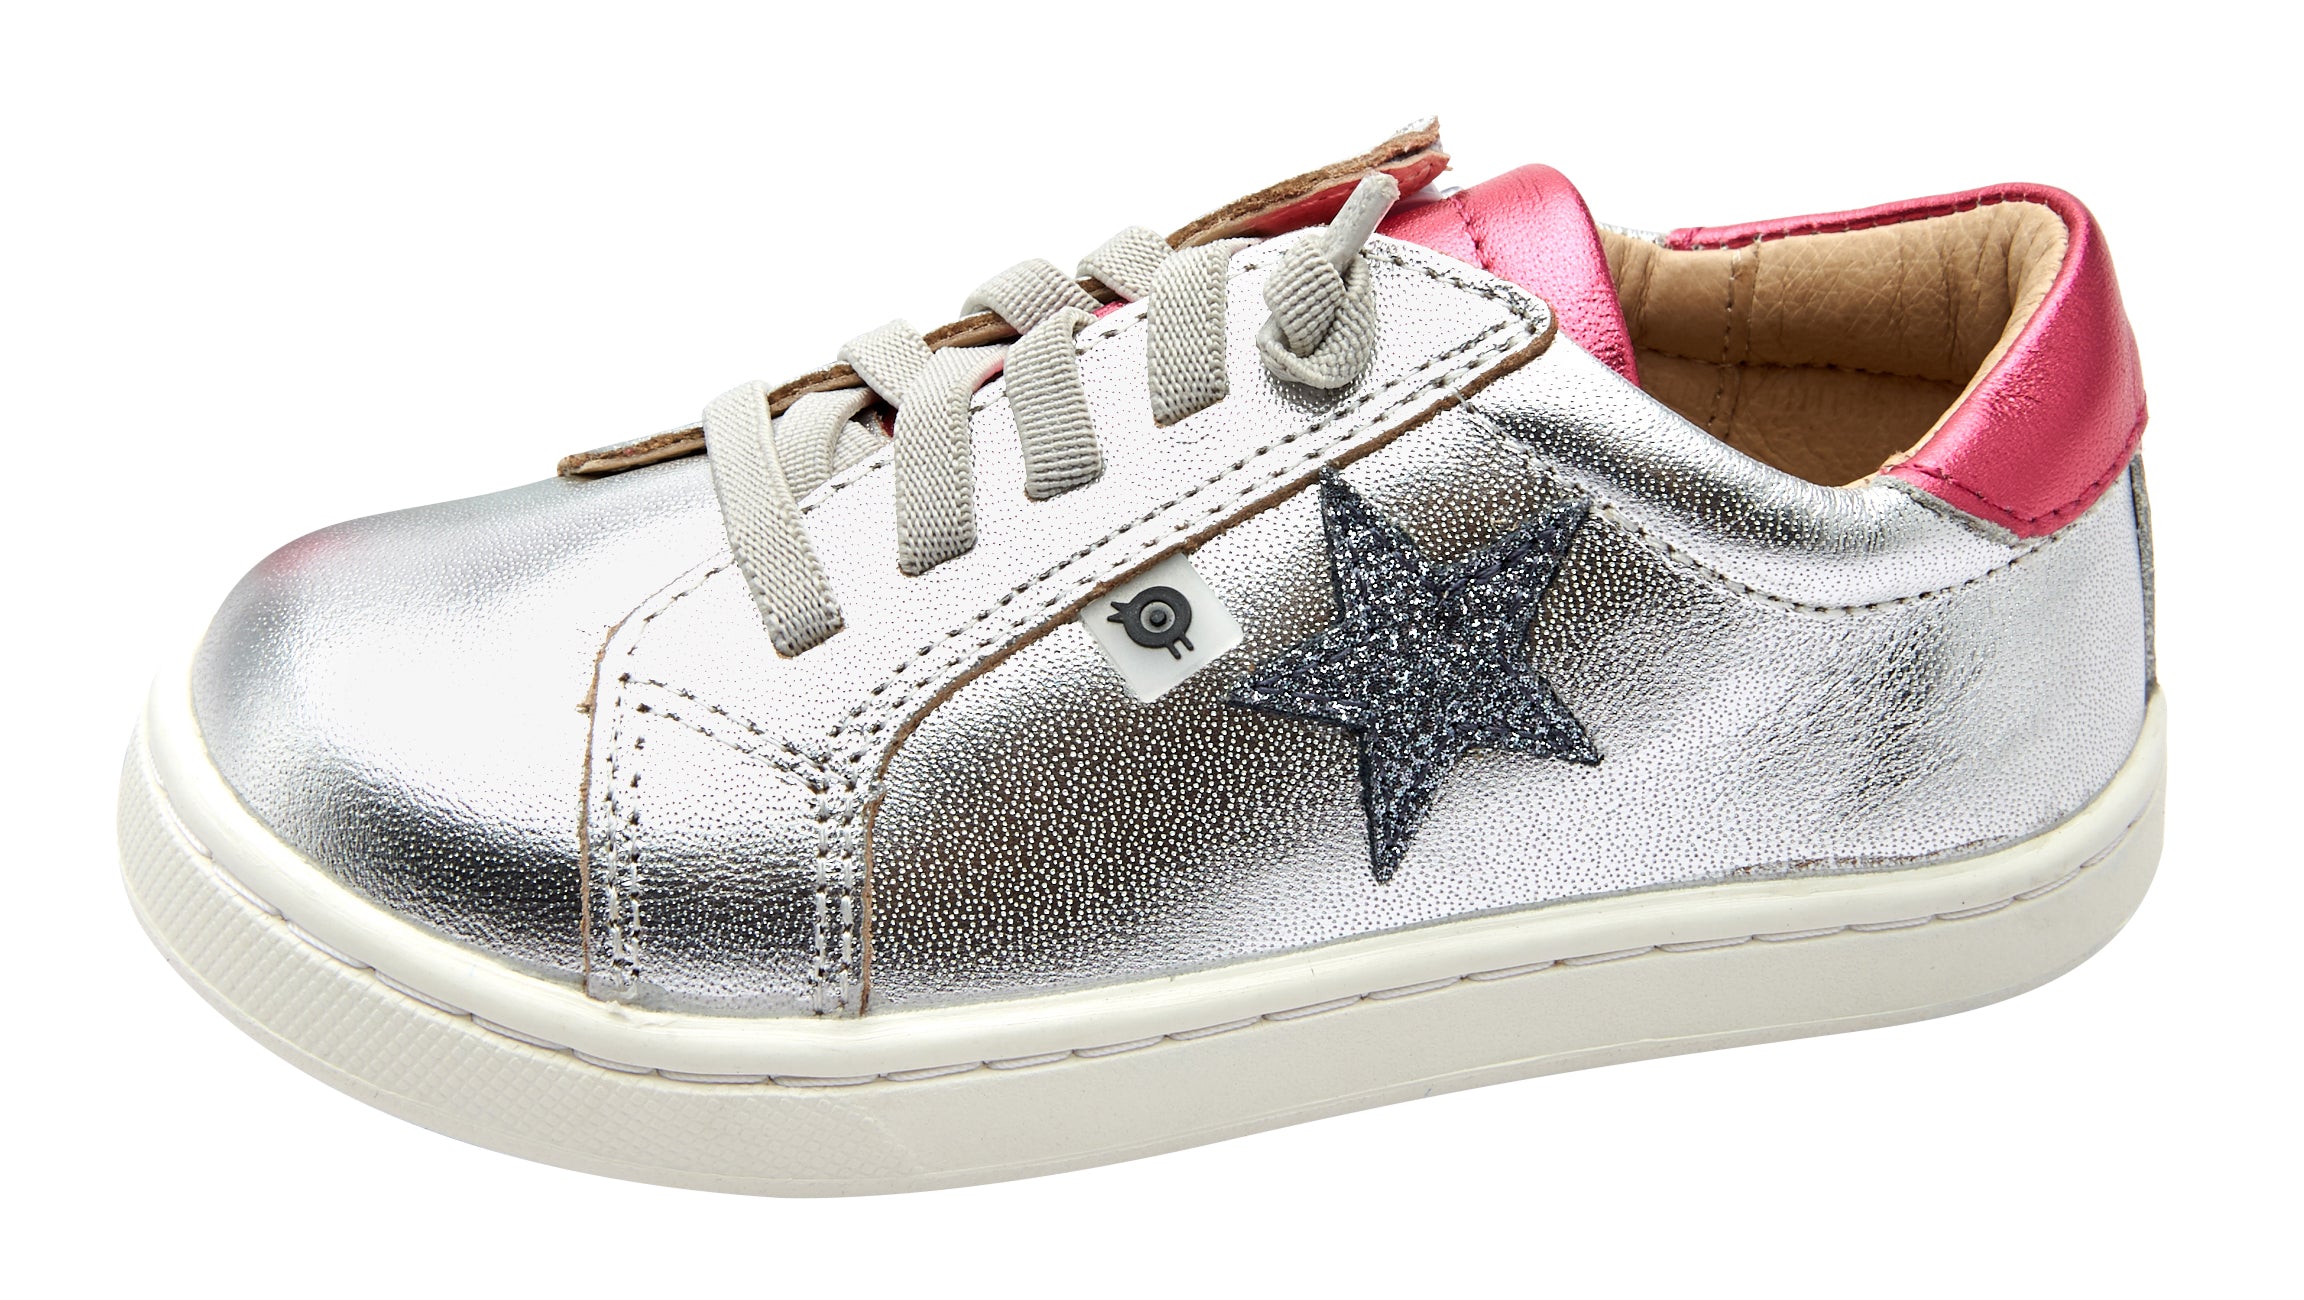 Soles Girl's 6118 Milky-Way - Silver/Fuchsia Foil/Glam Gu – Just Shoes